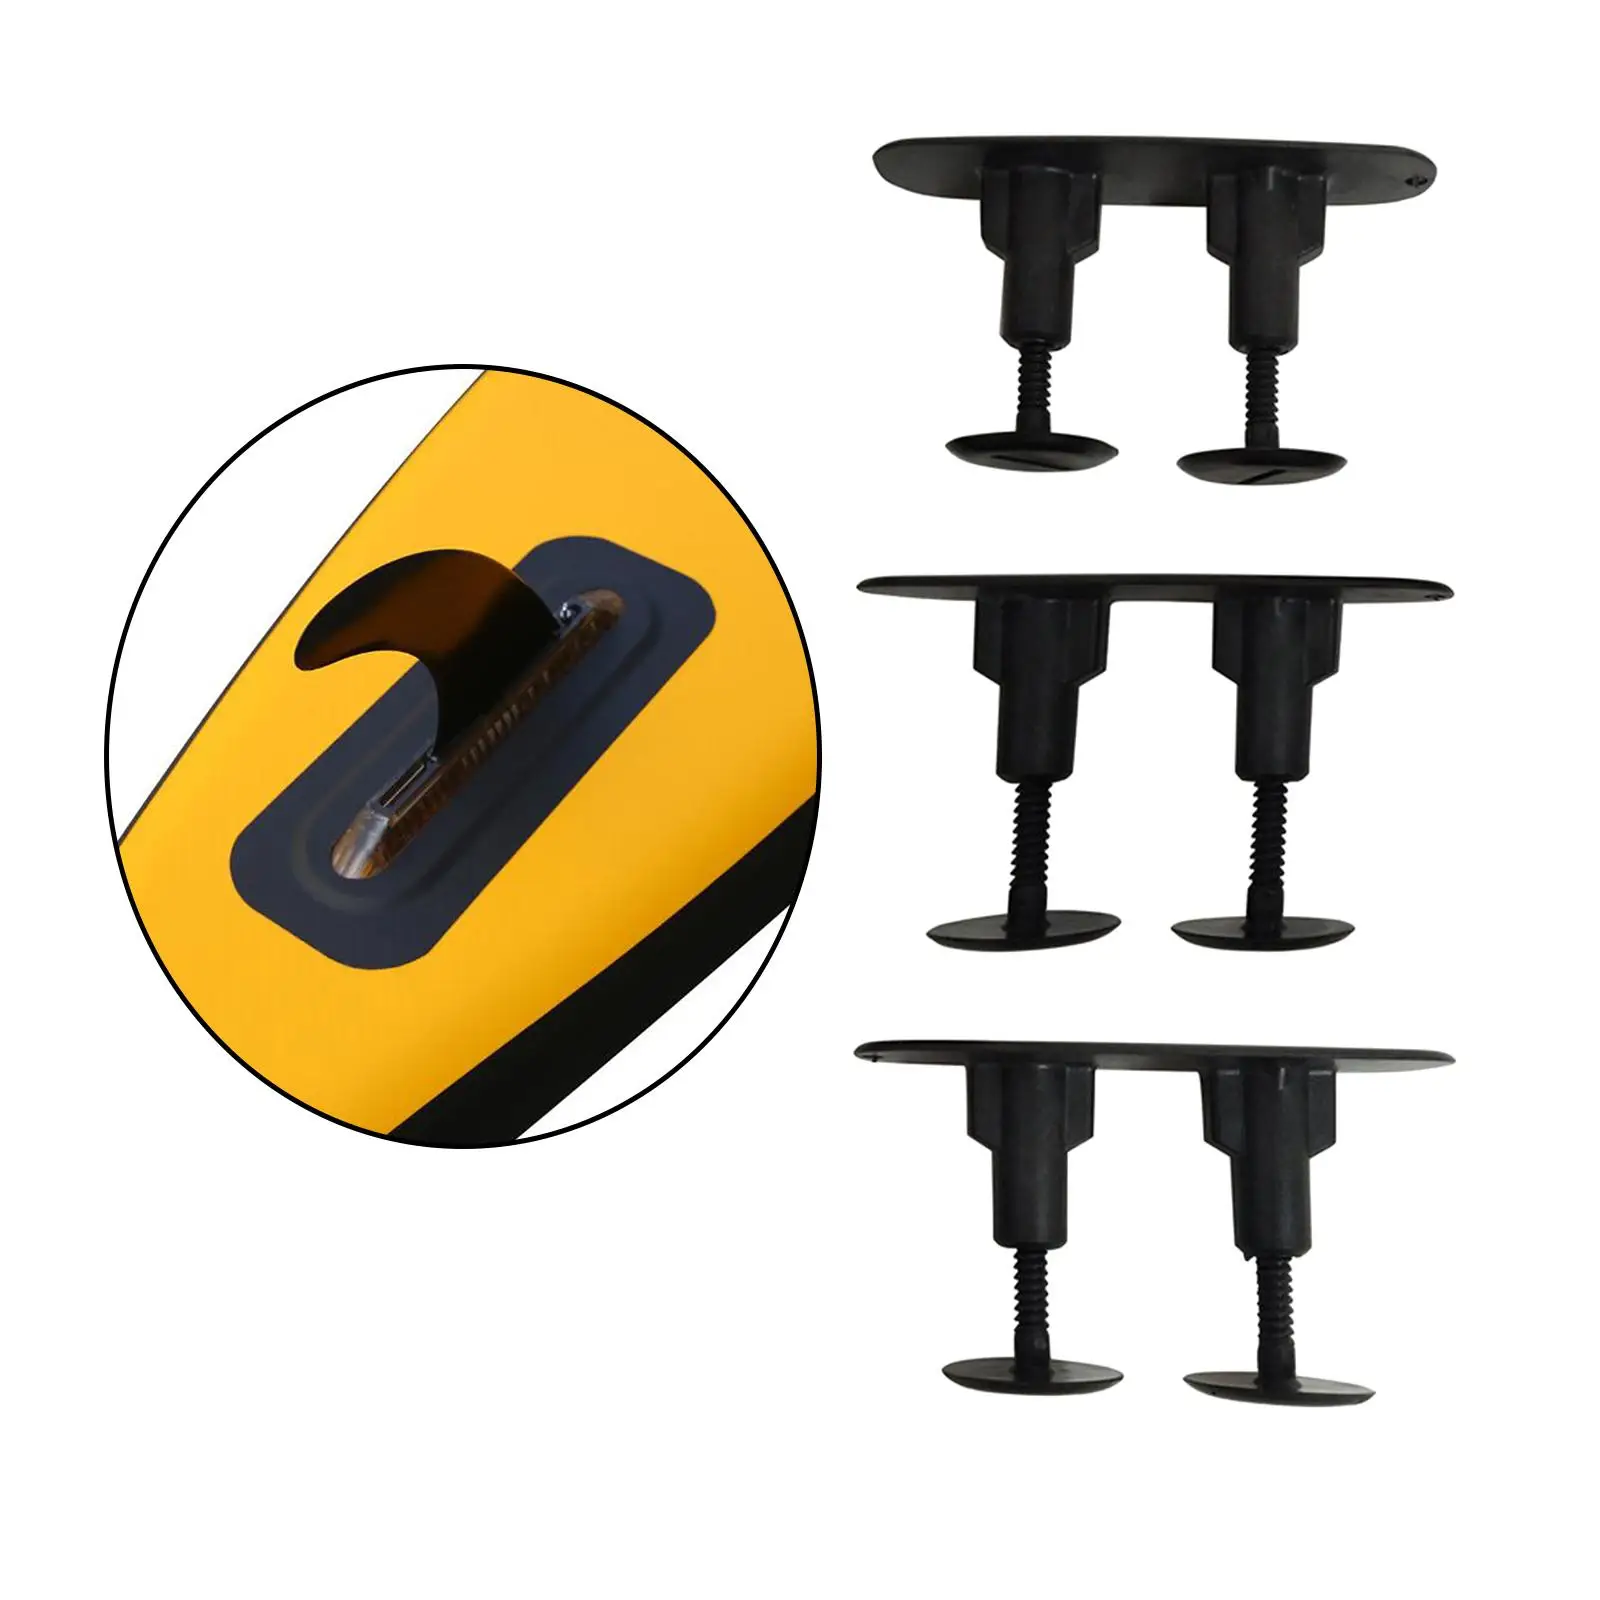 3x Surfboard Fins Plugs Replacements Groove Base Surfing Fins Box for Stand up Paddleboard Surfing Inflatable Canoe Cruiser Deck